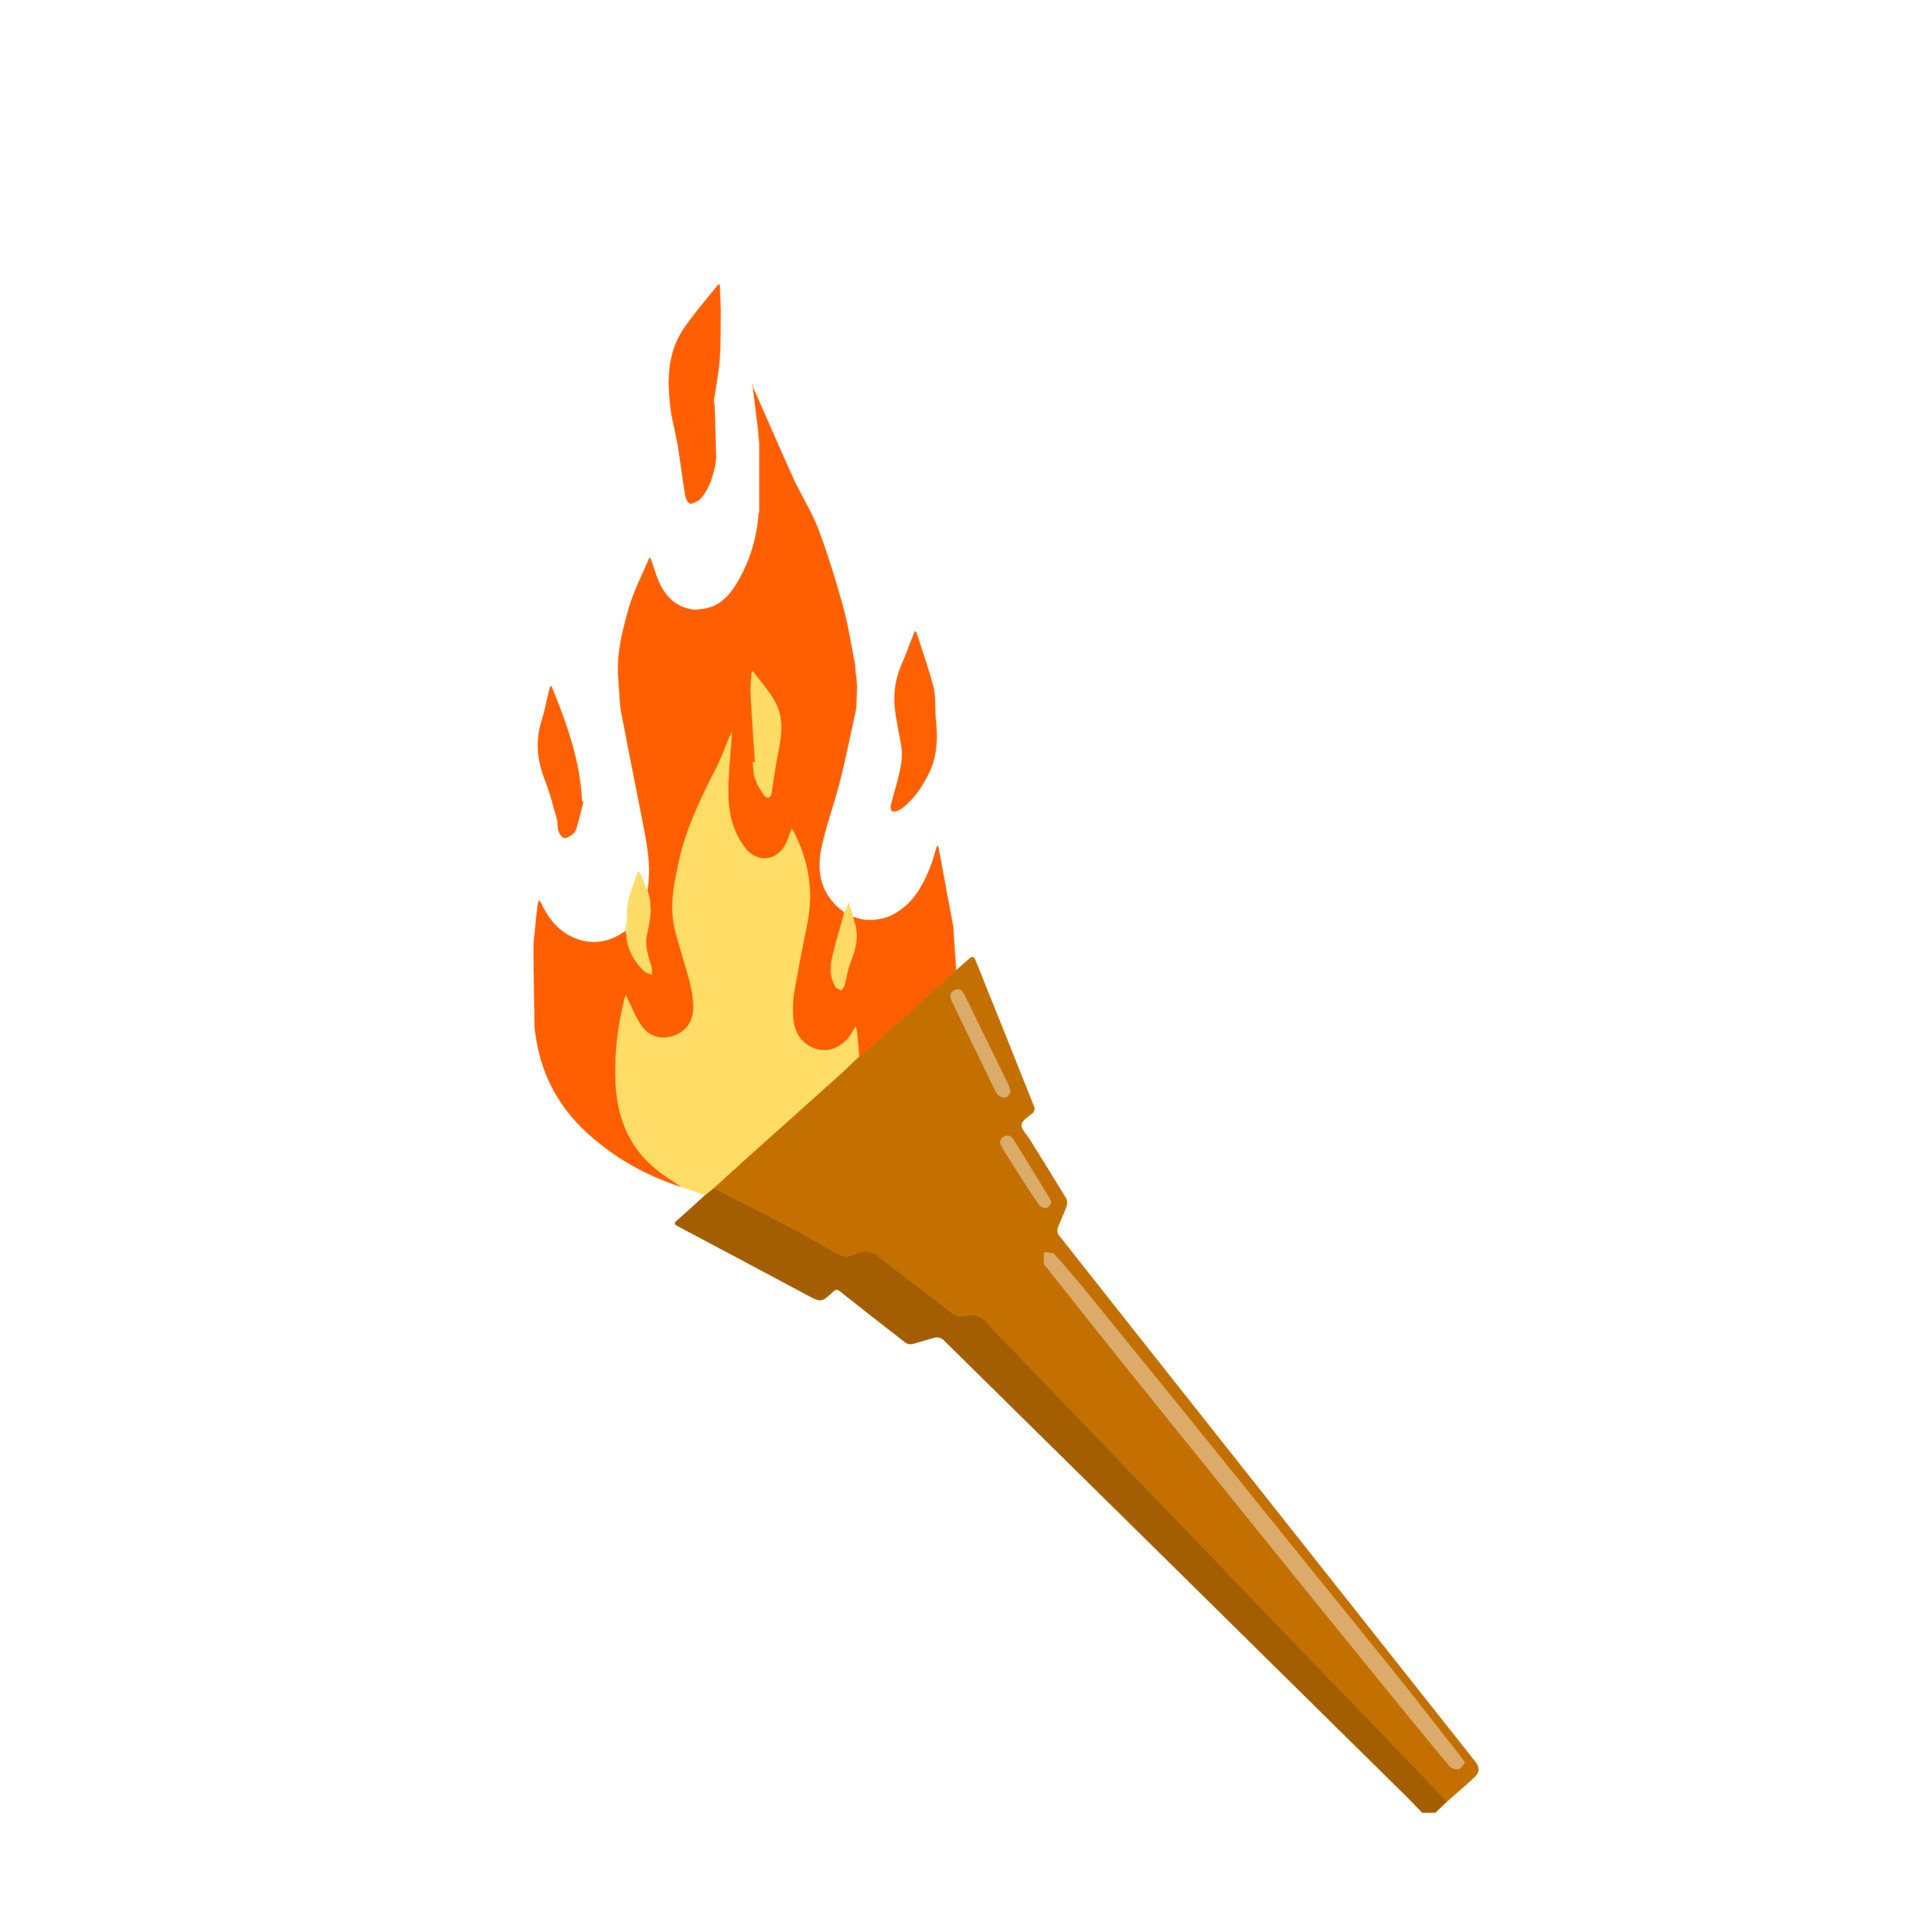 https://static.vecteezy.com/system/resources/previews/014/304/144/original/torch-with-fire-olympic-flame-greek-symbol-of-sports-competitions-the-concept-of-light-and-knowledge-flat-cartoon-illustration-vector.jpg